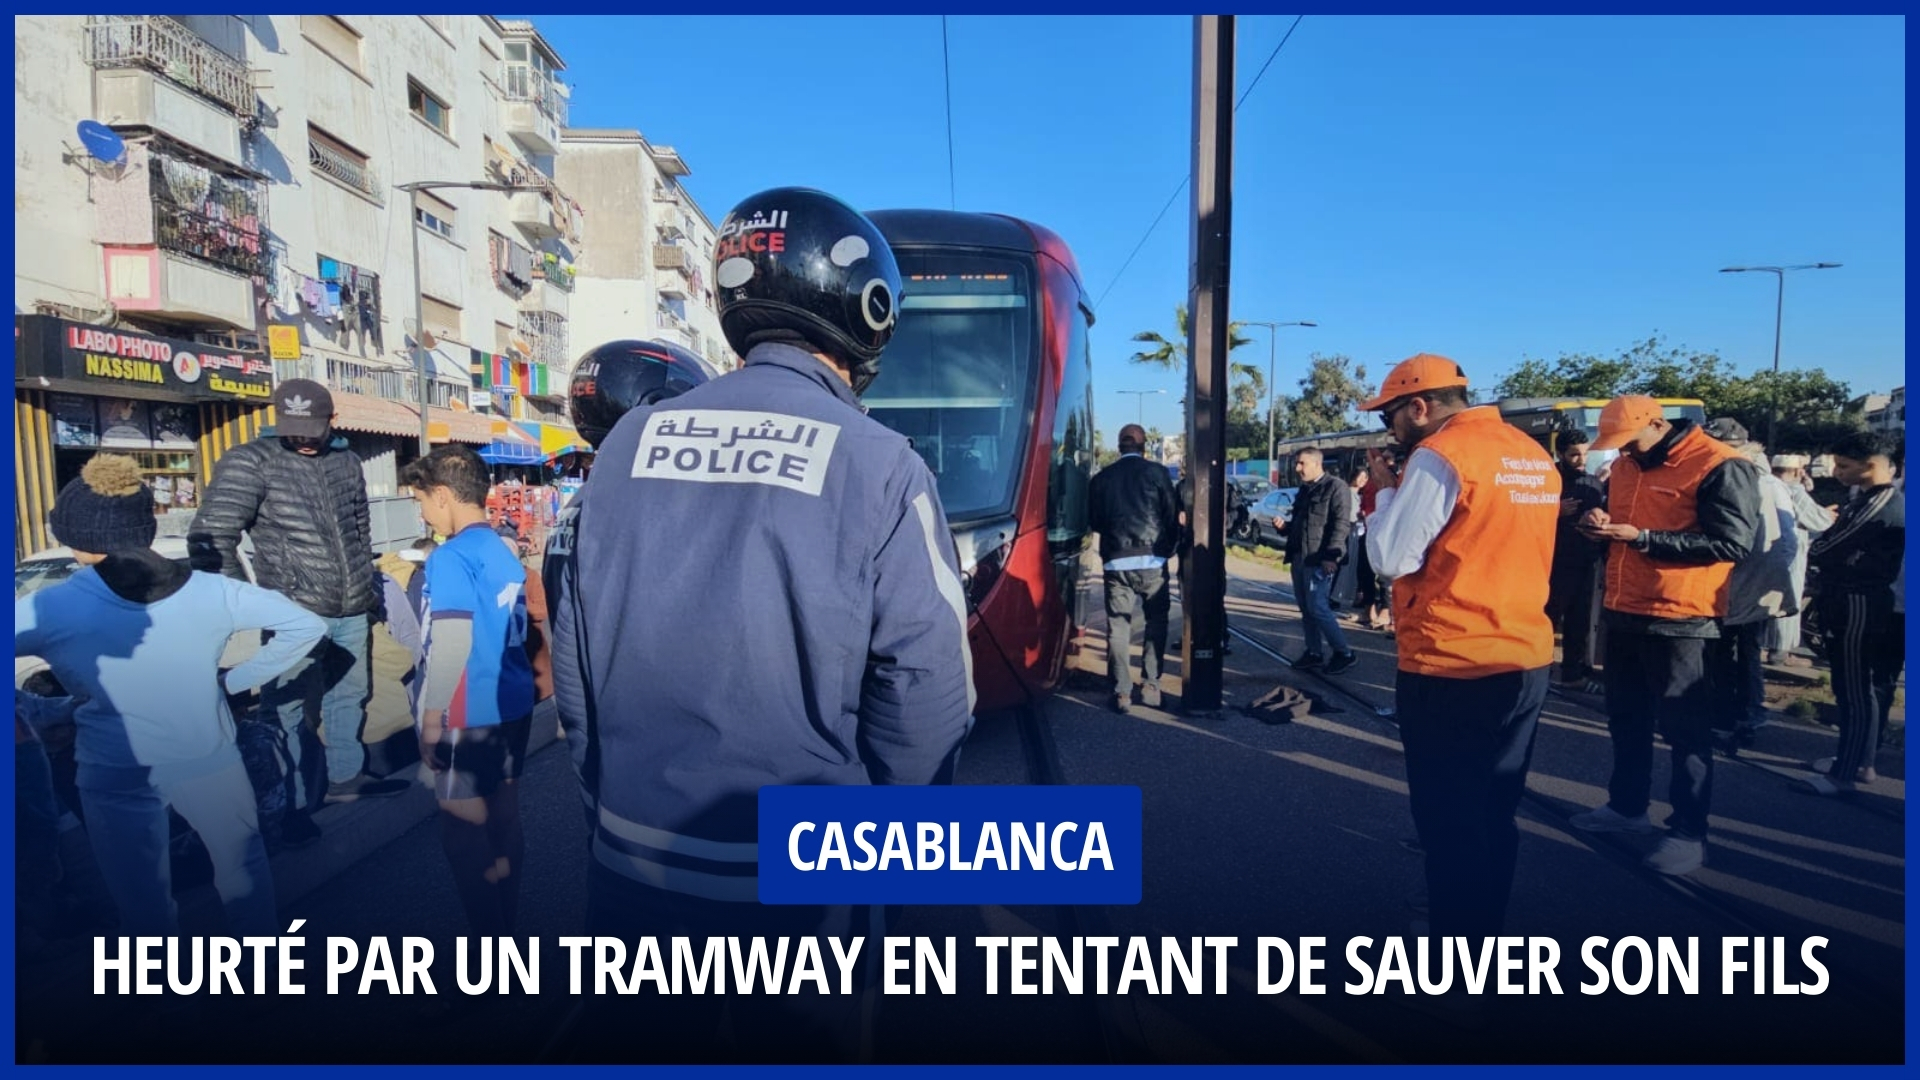 Casablanca: A Courageous Father Hit by a Tram While Trying to Save His Son